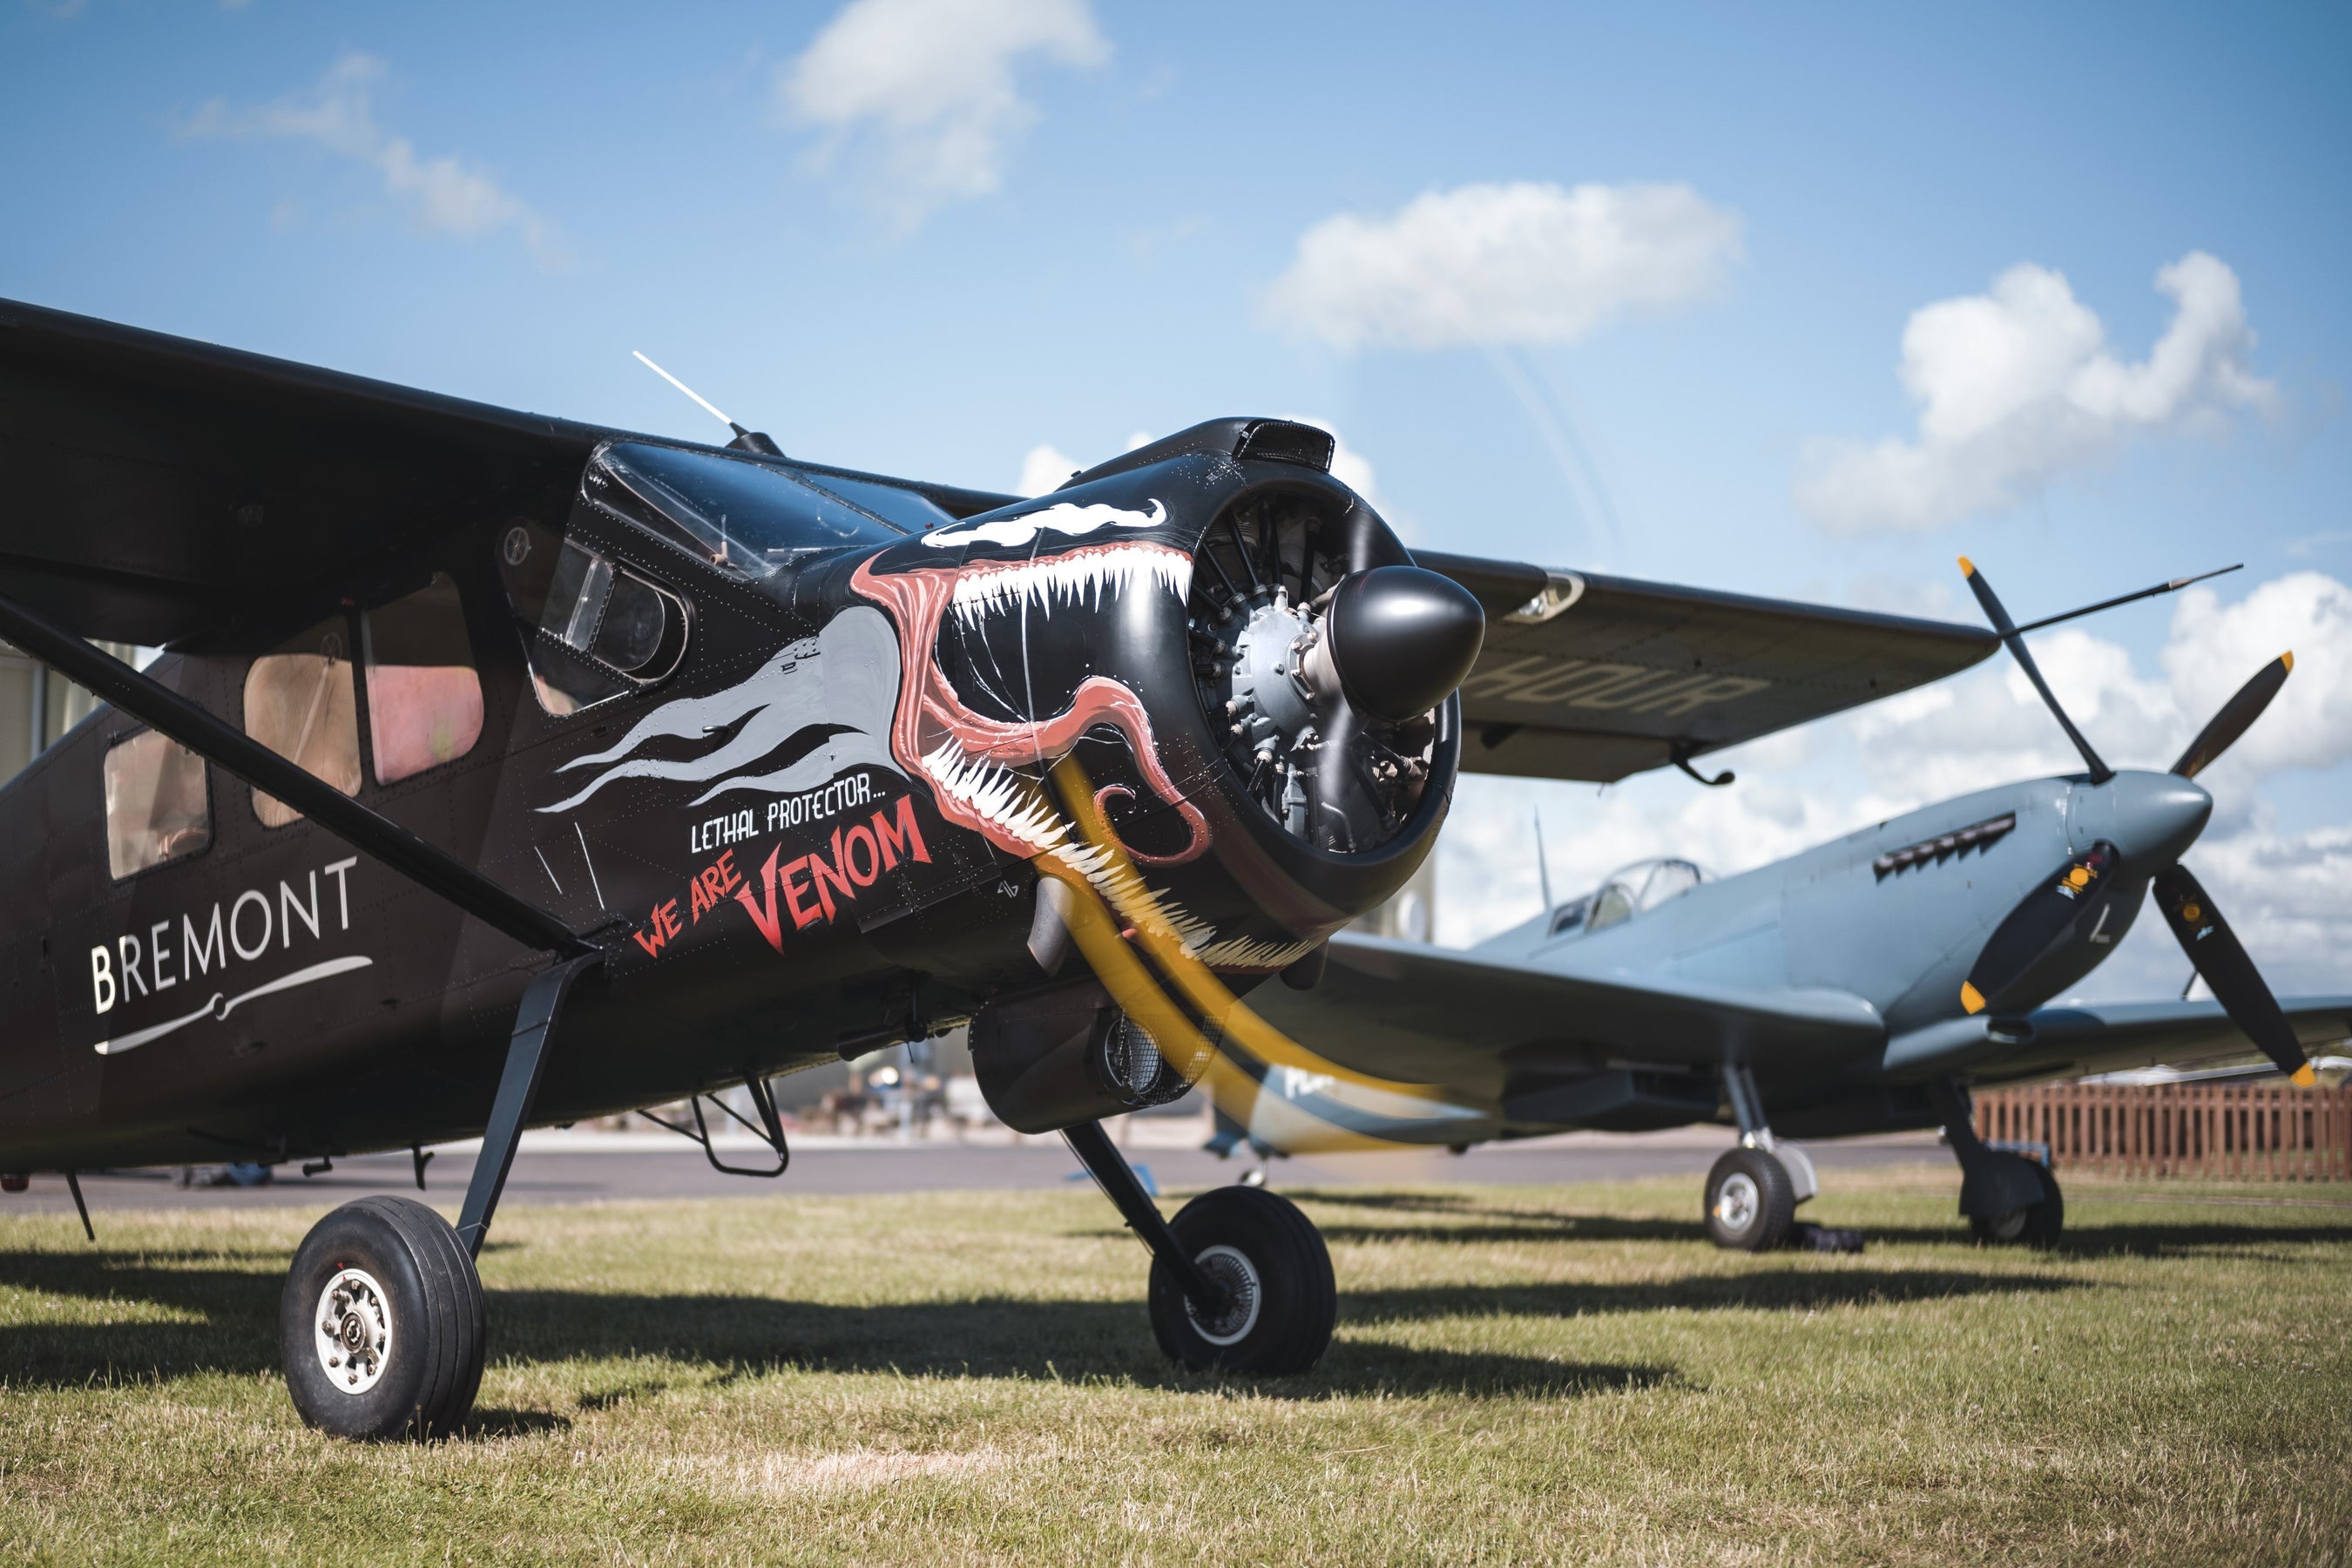 A BRIEF HISTORY OF NOSE ART ON WWII WARBIRDS